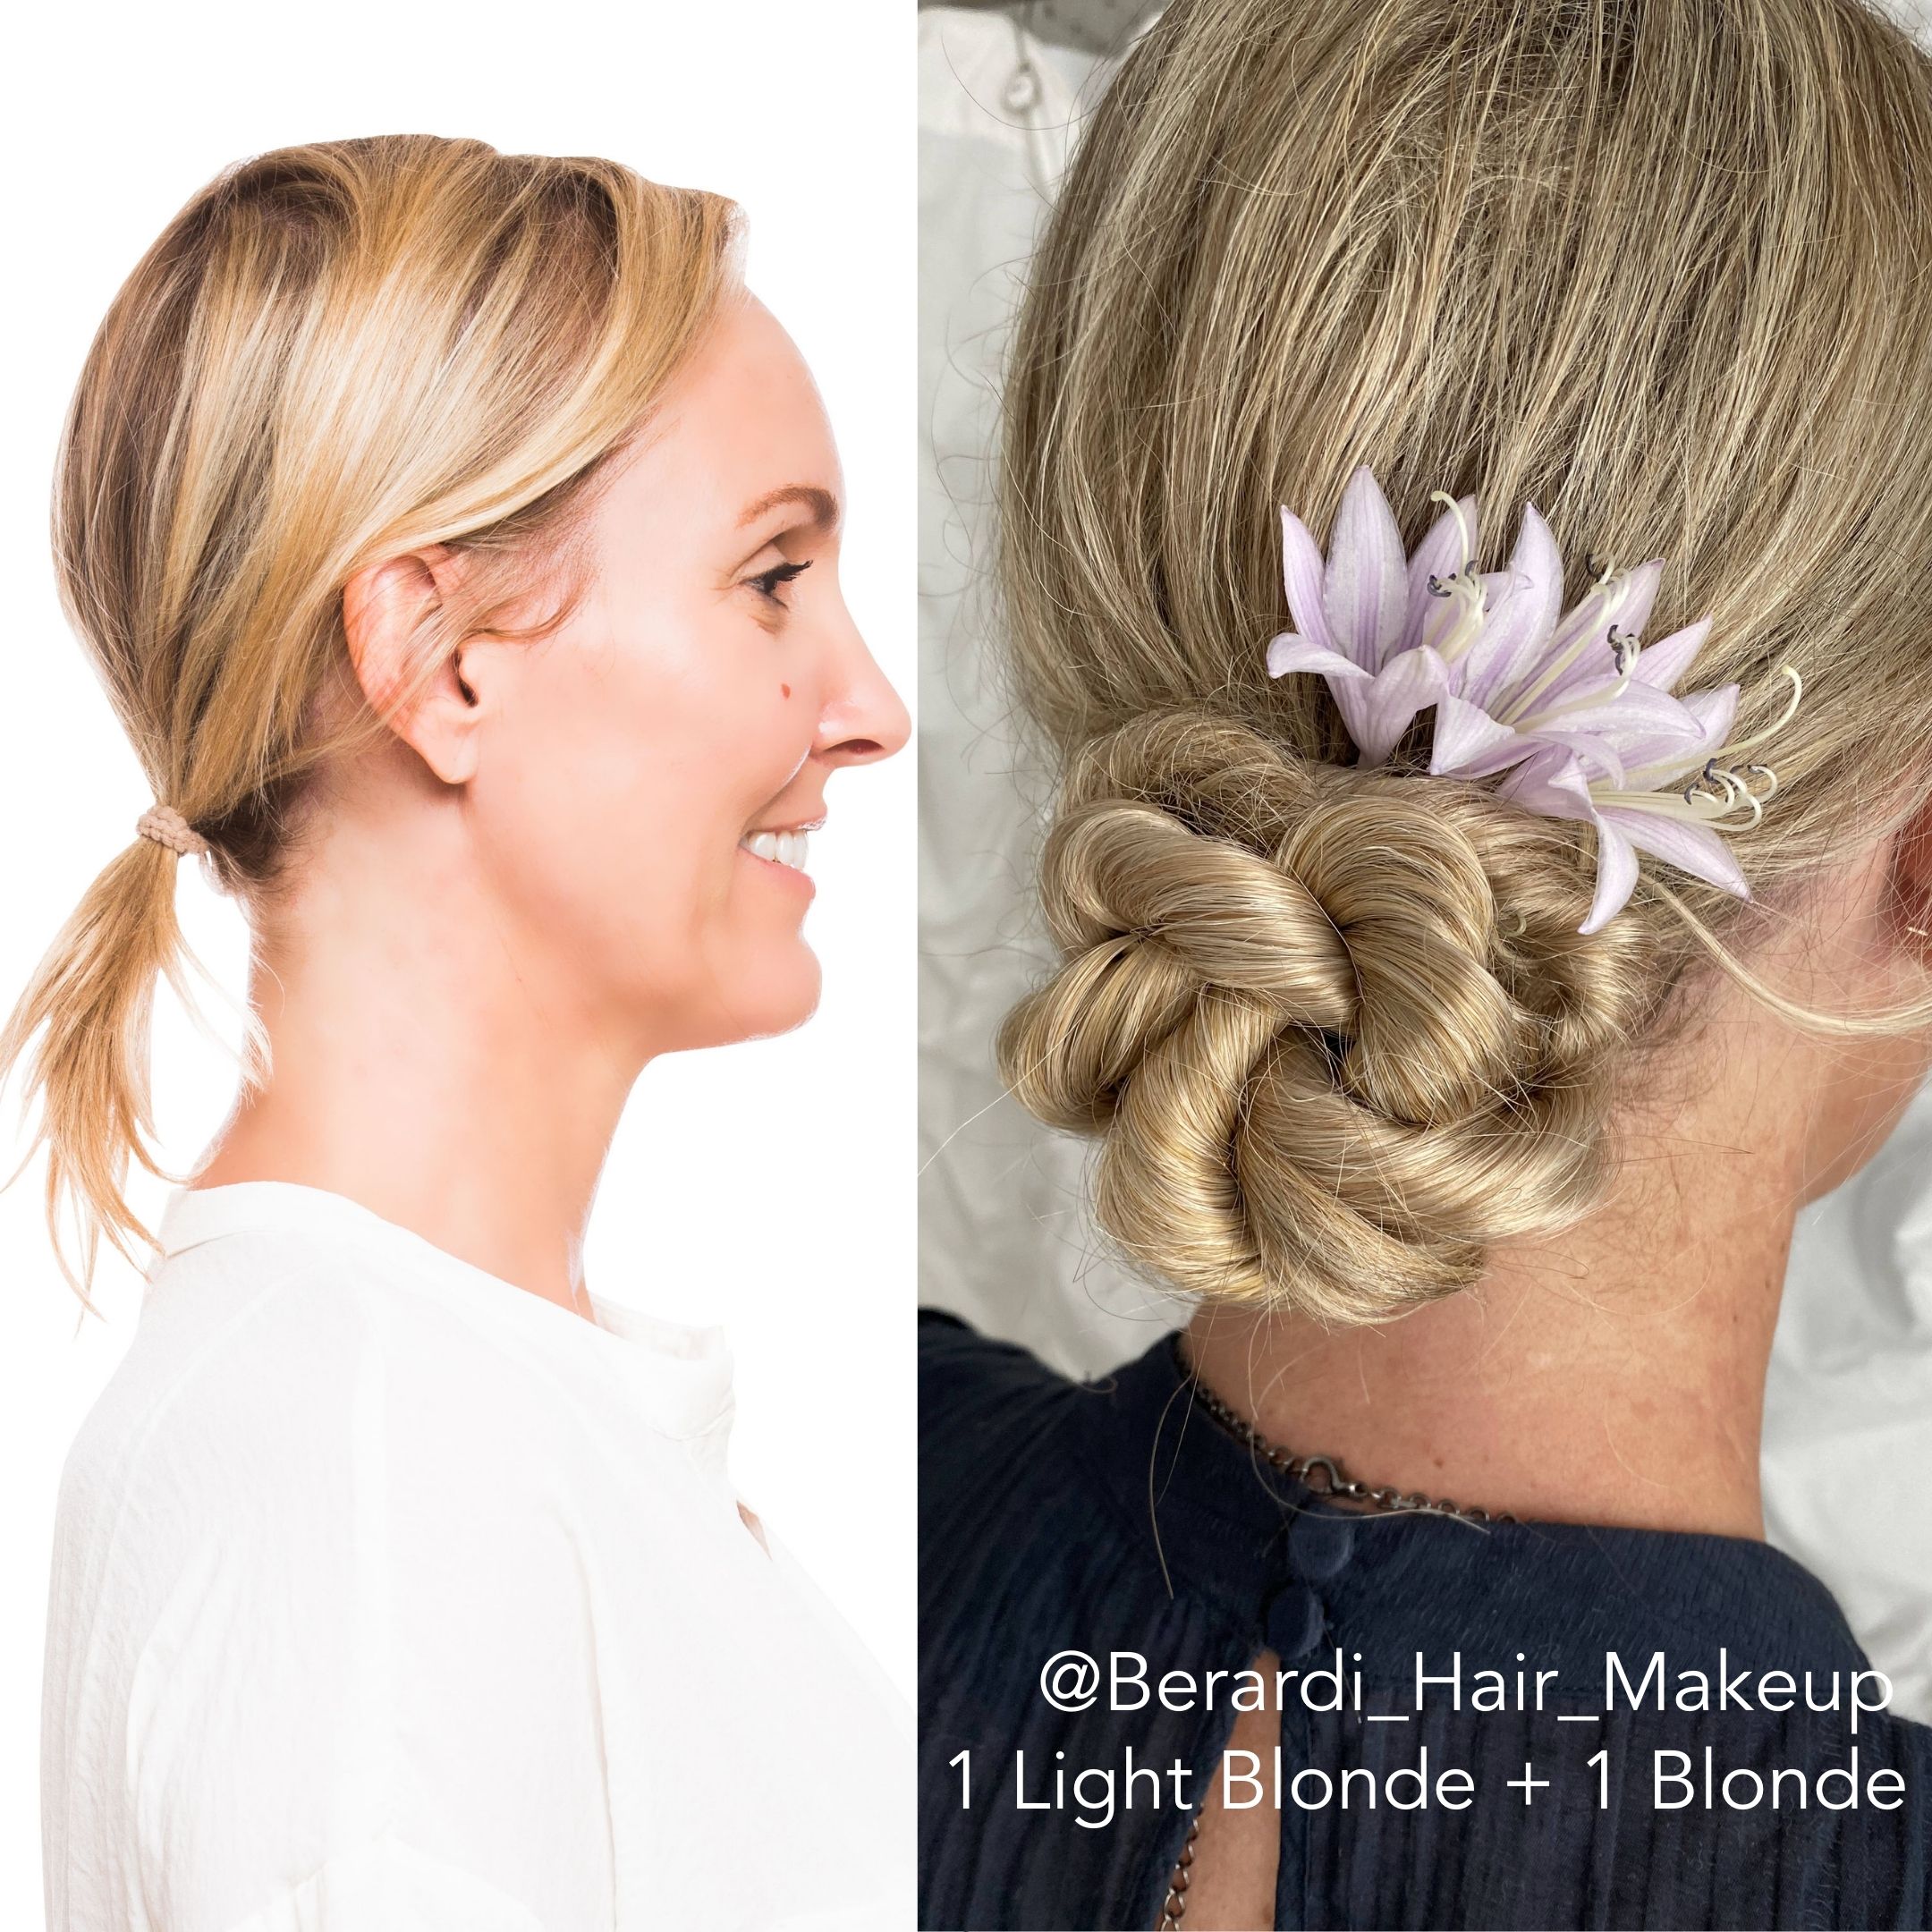 5 Quick & Easy Updo Hairstyles to Look Chic & Stylish in A Hurry